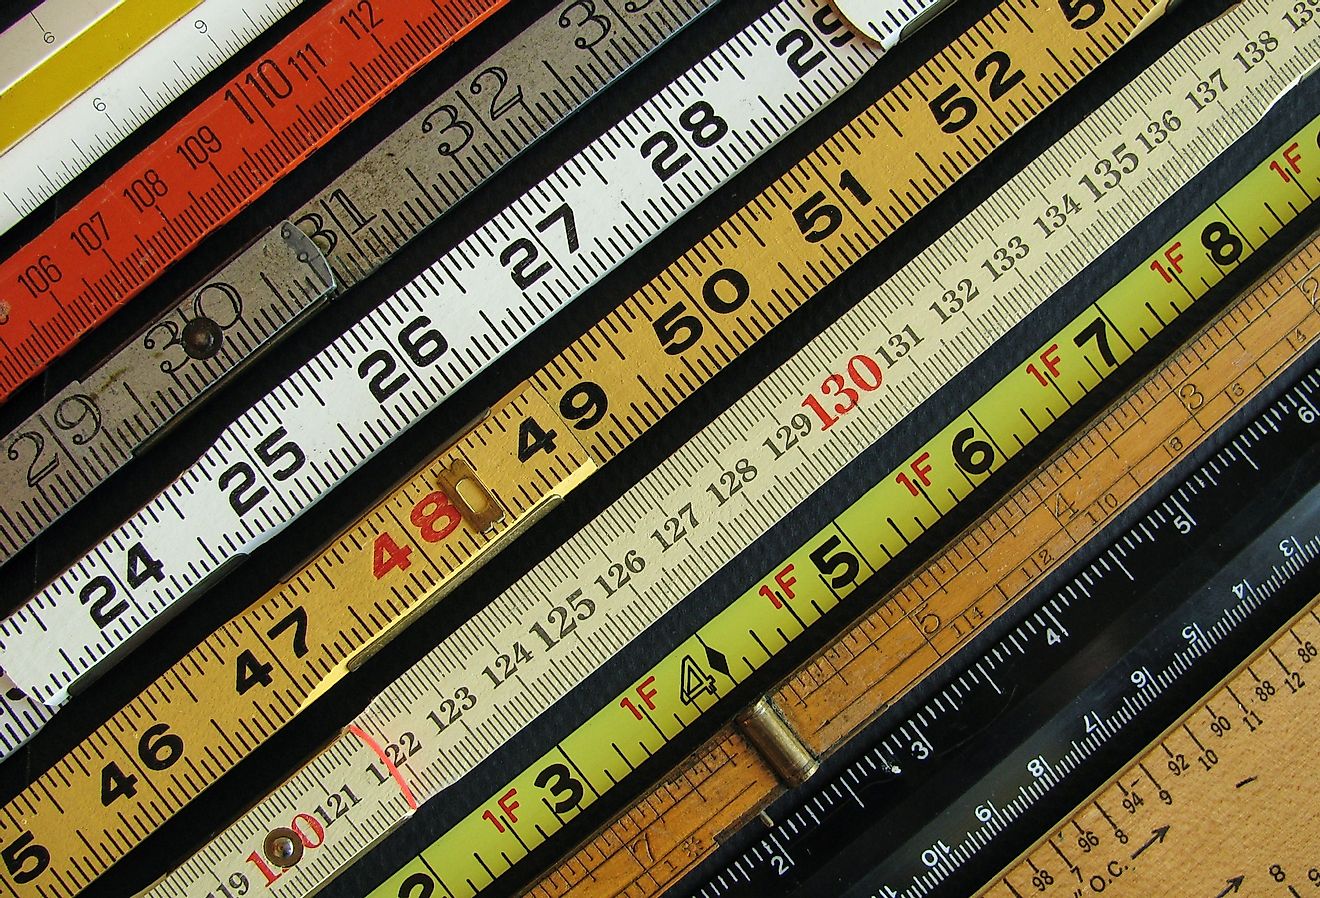 Old rulers both metric and inches, scales and measuring tools represent measurement, metrics, and precision.